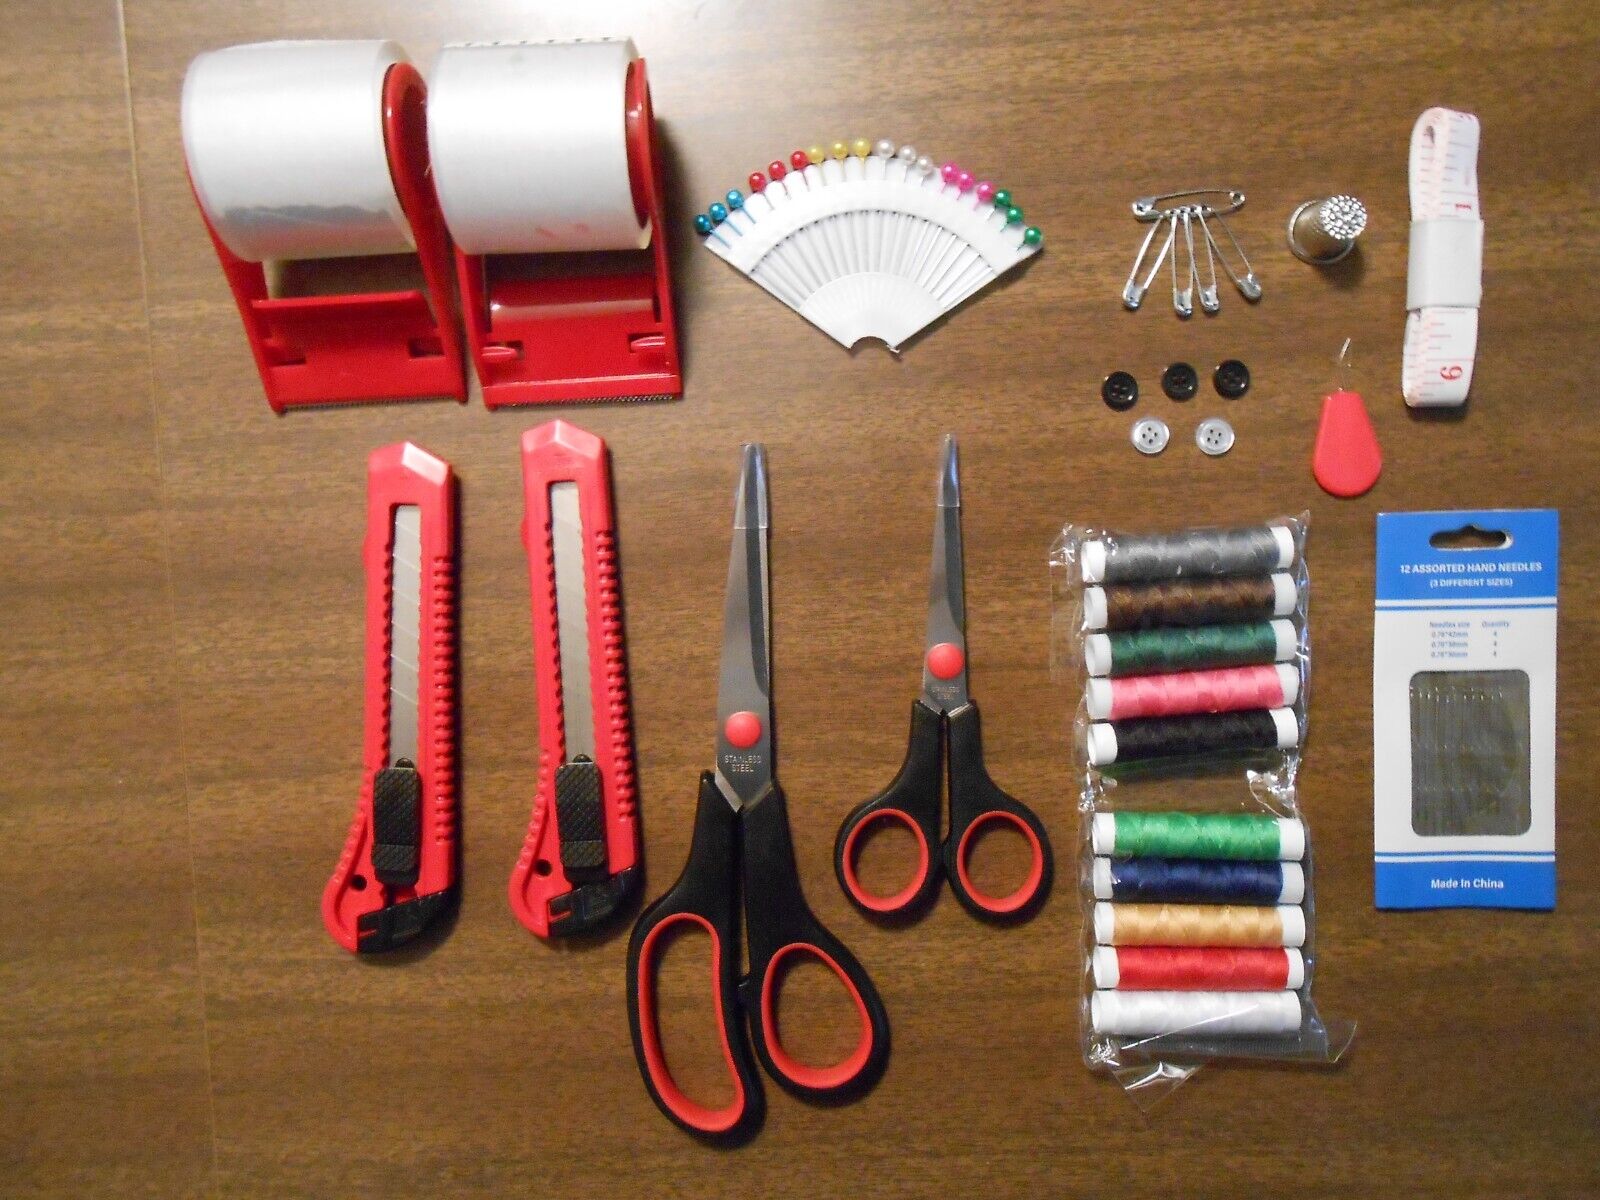 Sewing Set: 60 Piece Sewing Set Brand New Near Mint Never Used